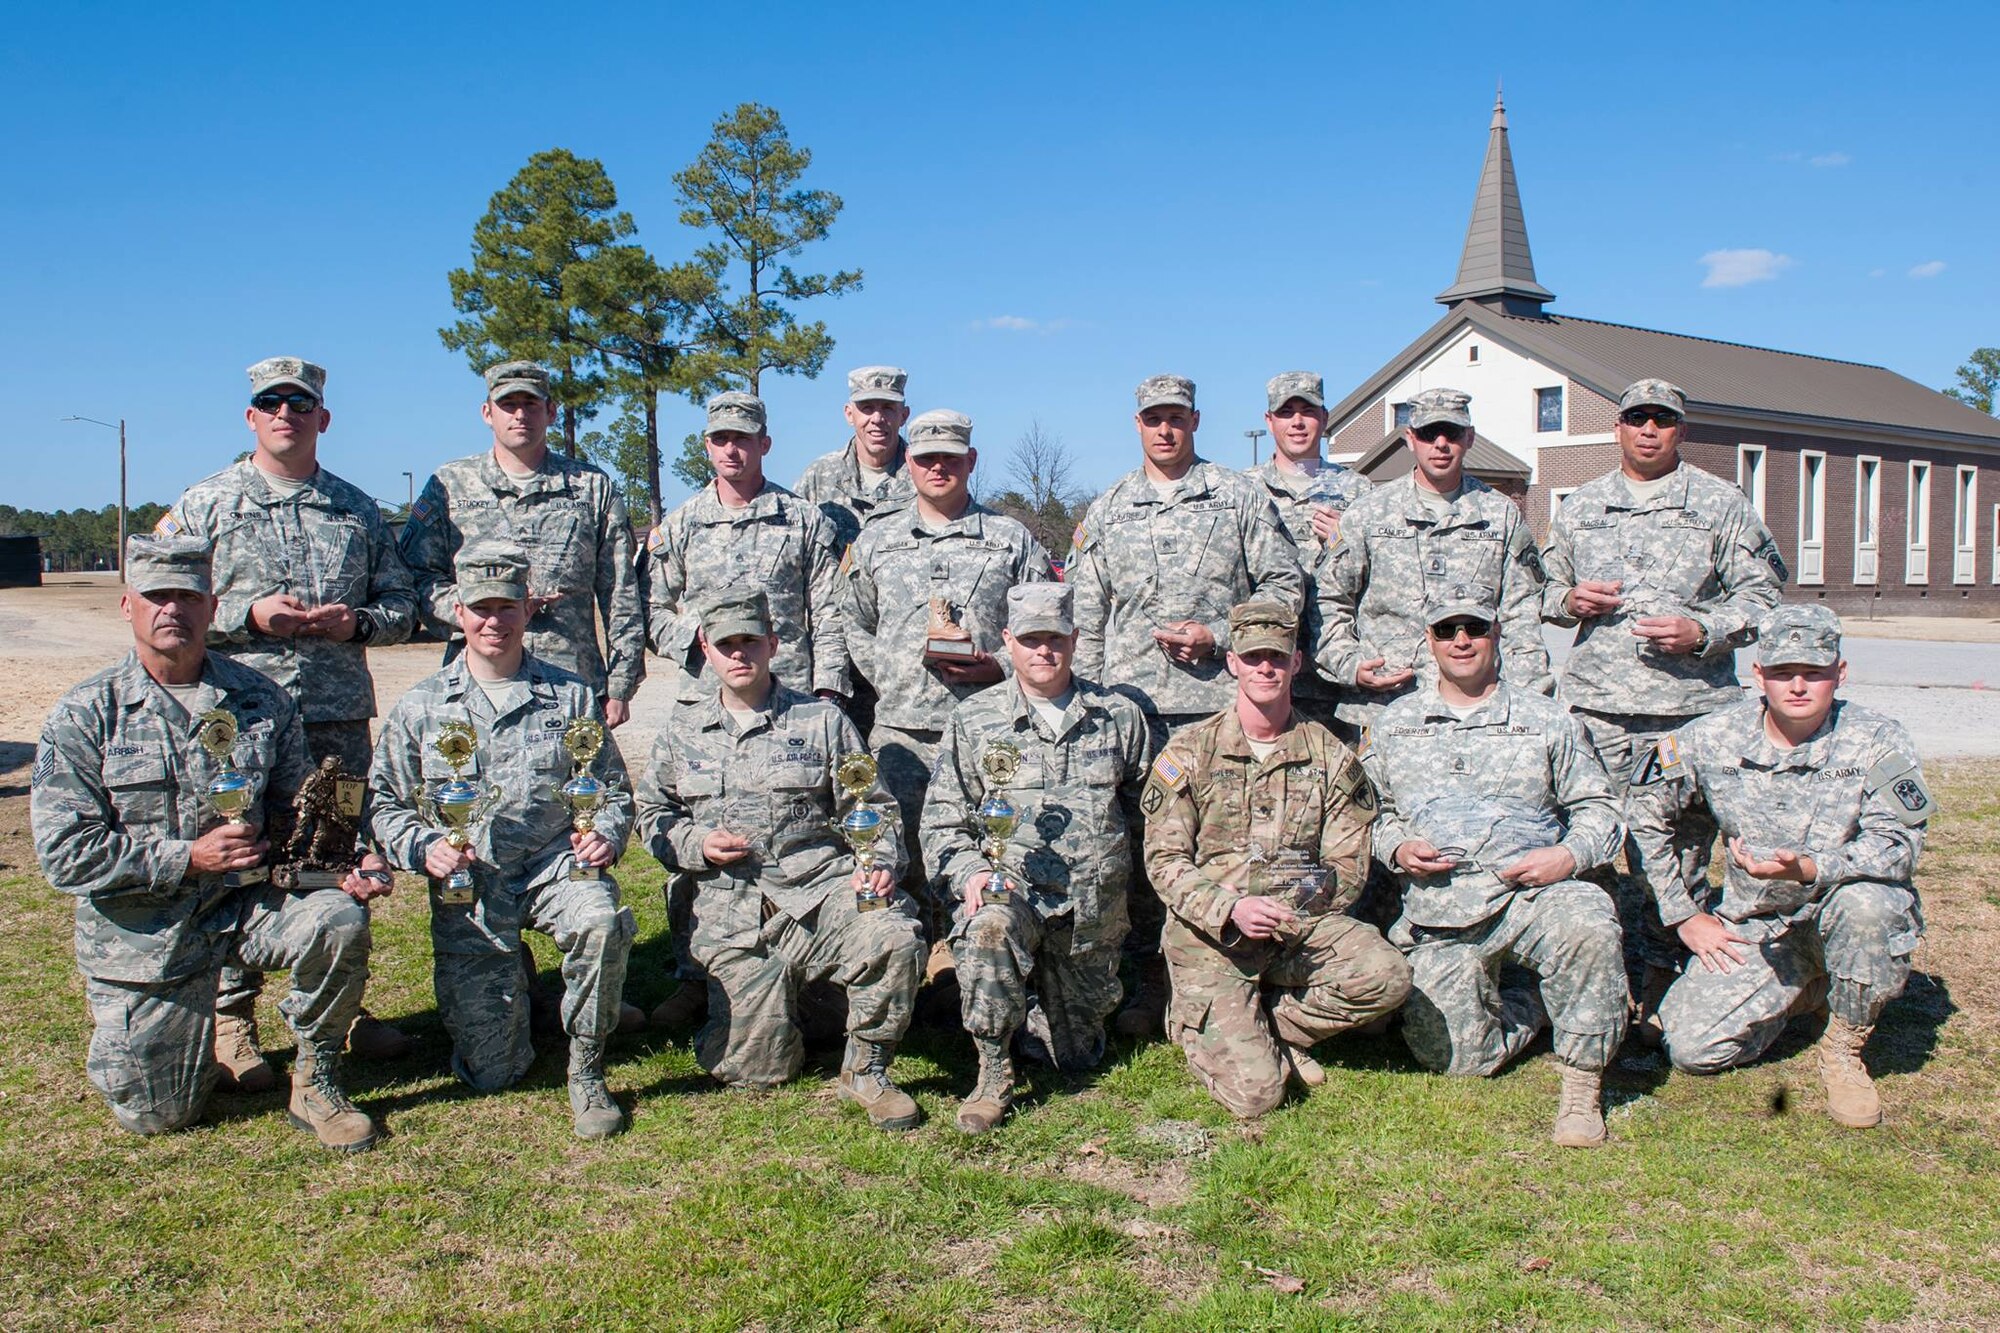 Members of the S.C. Army and Air National Guard competed alongside with members of the German Army in the annual South Carolina National Guard Warfighter Sustainment Training Exercise, otherwise known as the TAG Marksmanship competition. Following the completion results were announced and awards presented to the winners at McCrady Training Center, Eastover, S.C., March 6, 2016. (U.S. Army National Guard photo by Sgt. Brian Calhoun, 108th Public Affairs Det)